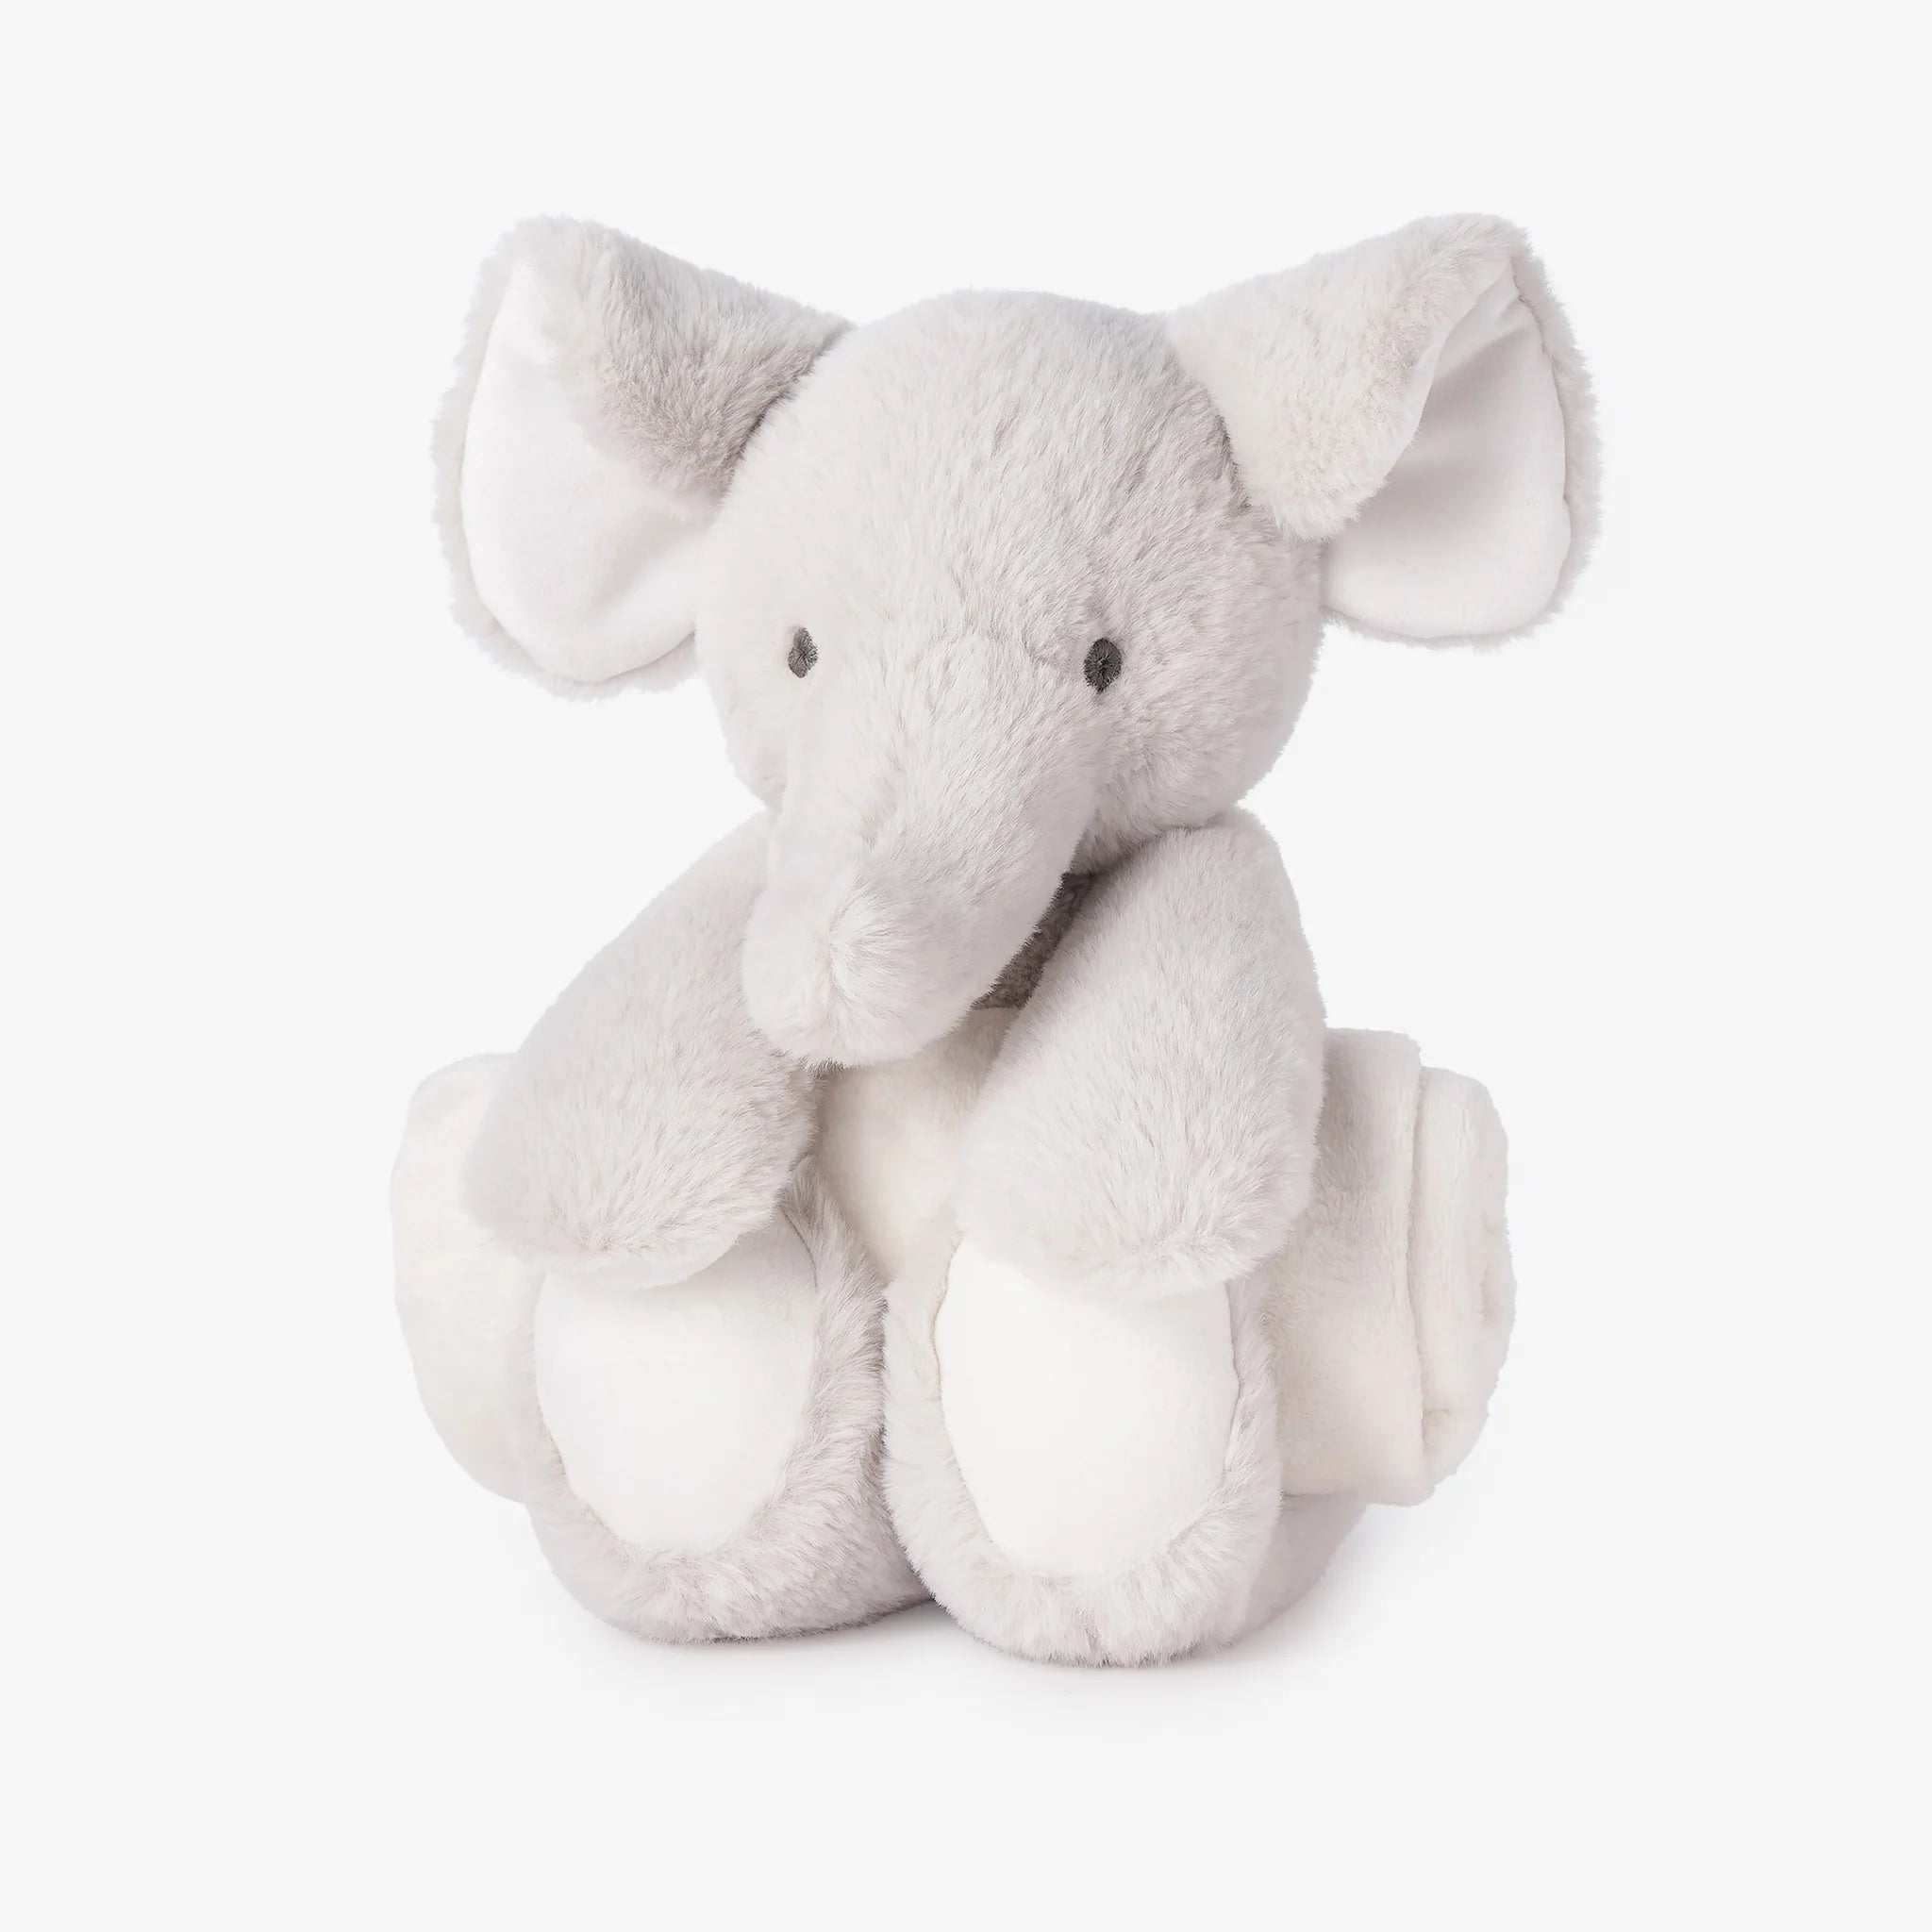 Elephant Bedtime Huggie Plush Toy with Blanket.